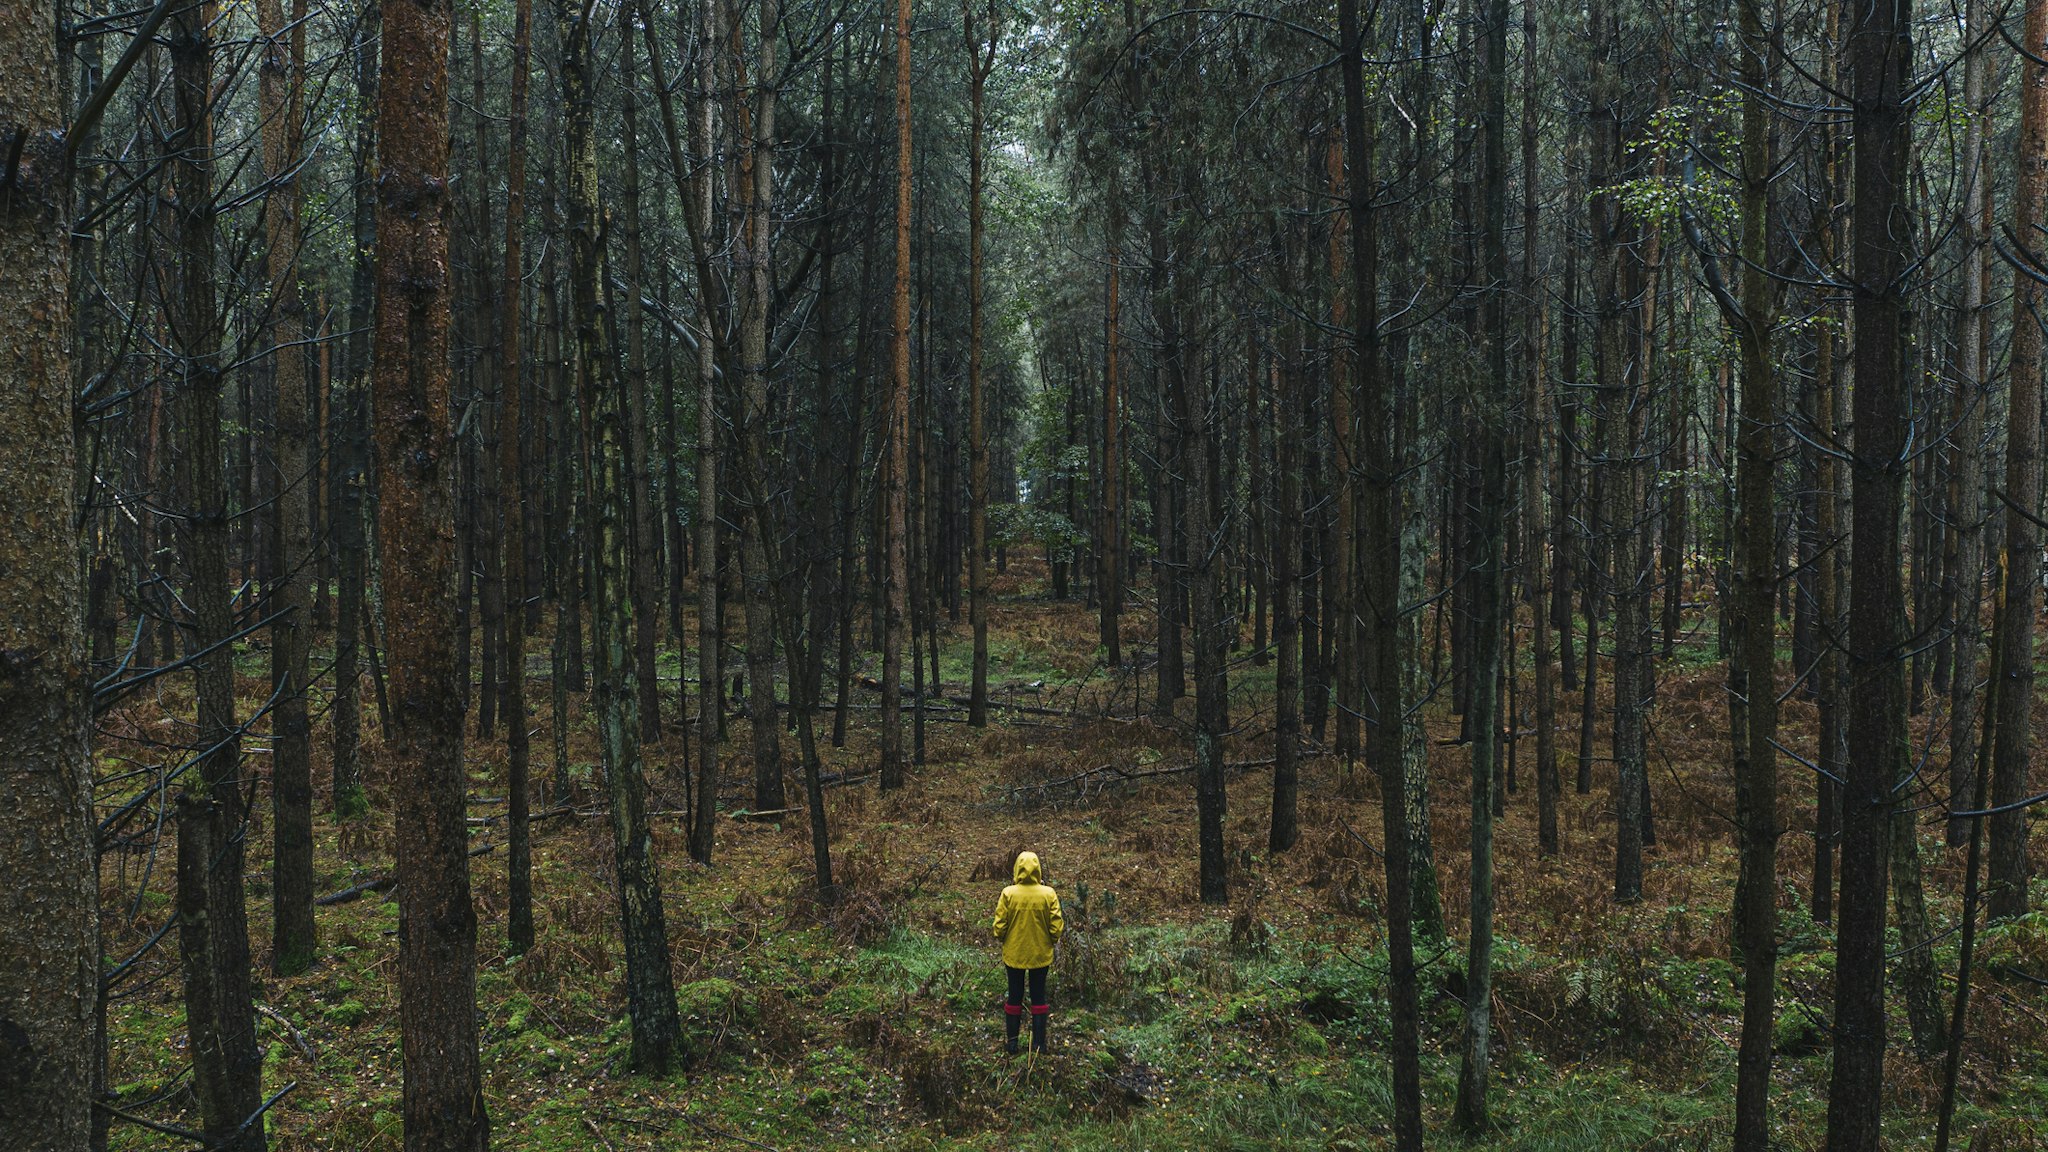 Drone footage of woman in yellow raincoat in wet forest - stock photo